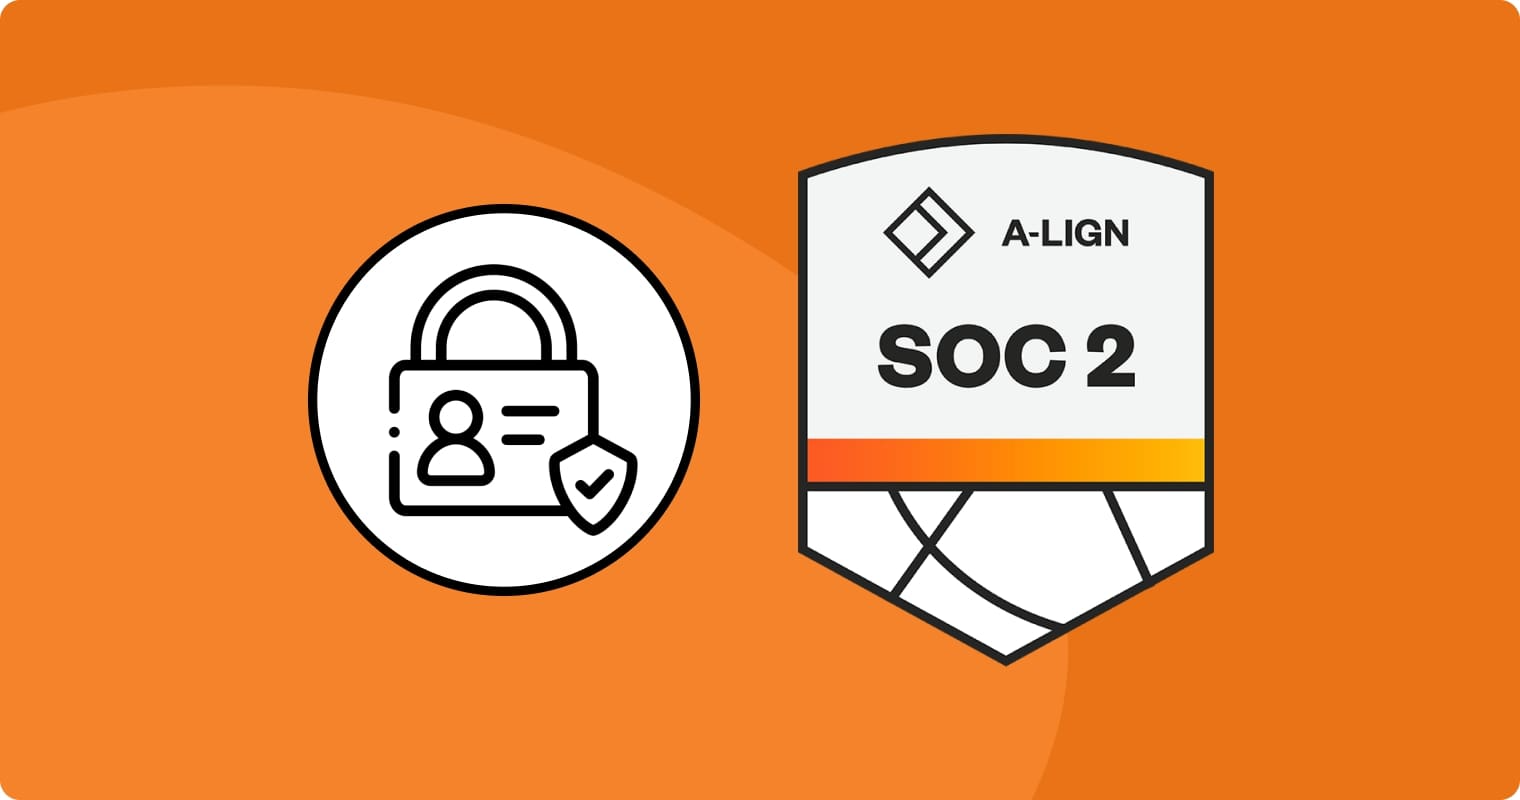 Cadence Continues to Further Data Security by Completing a SOC 2 Assessment